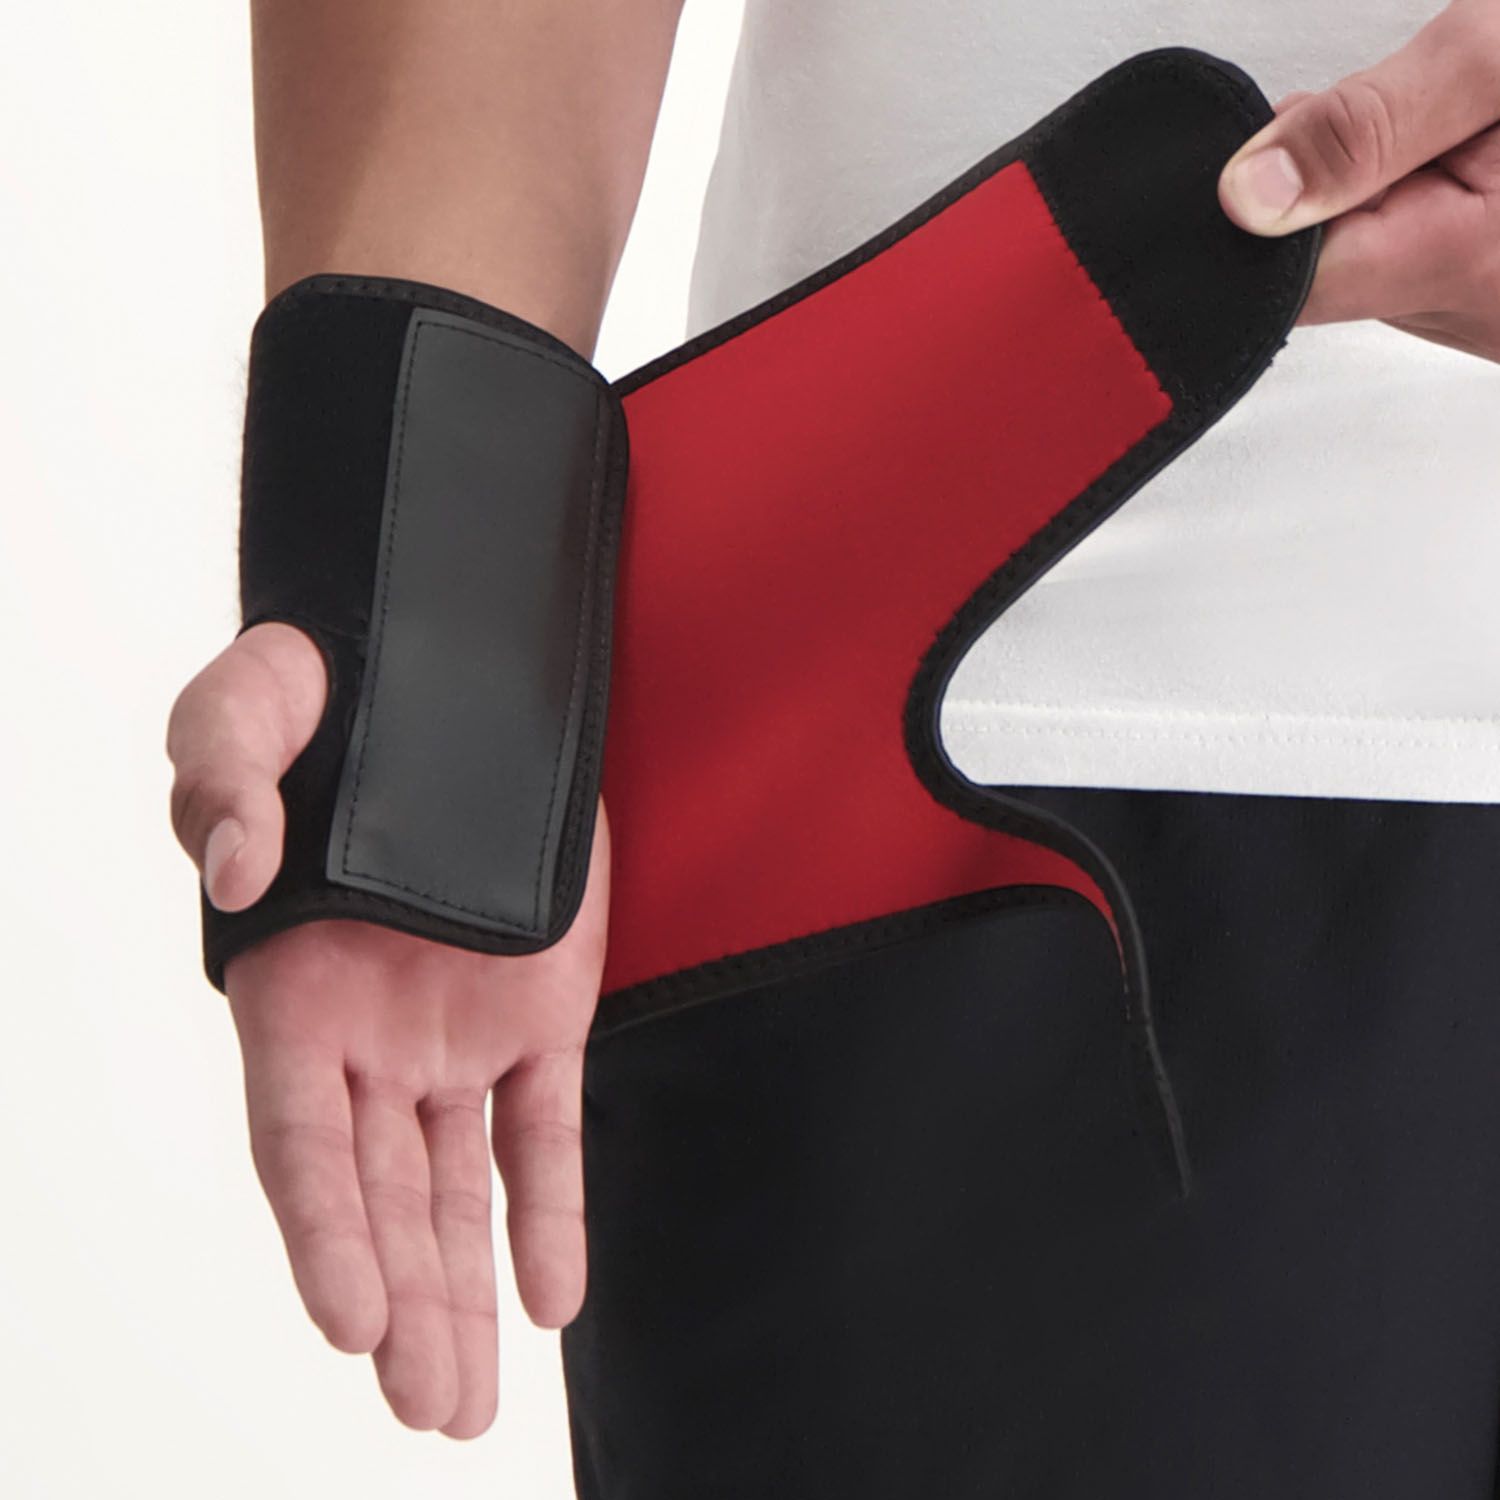 dunimed carpal tunnel syndrome wrist support around right hand